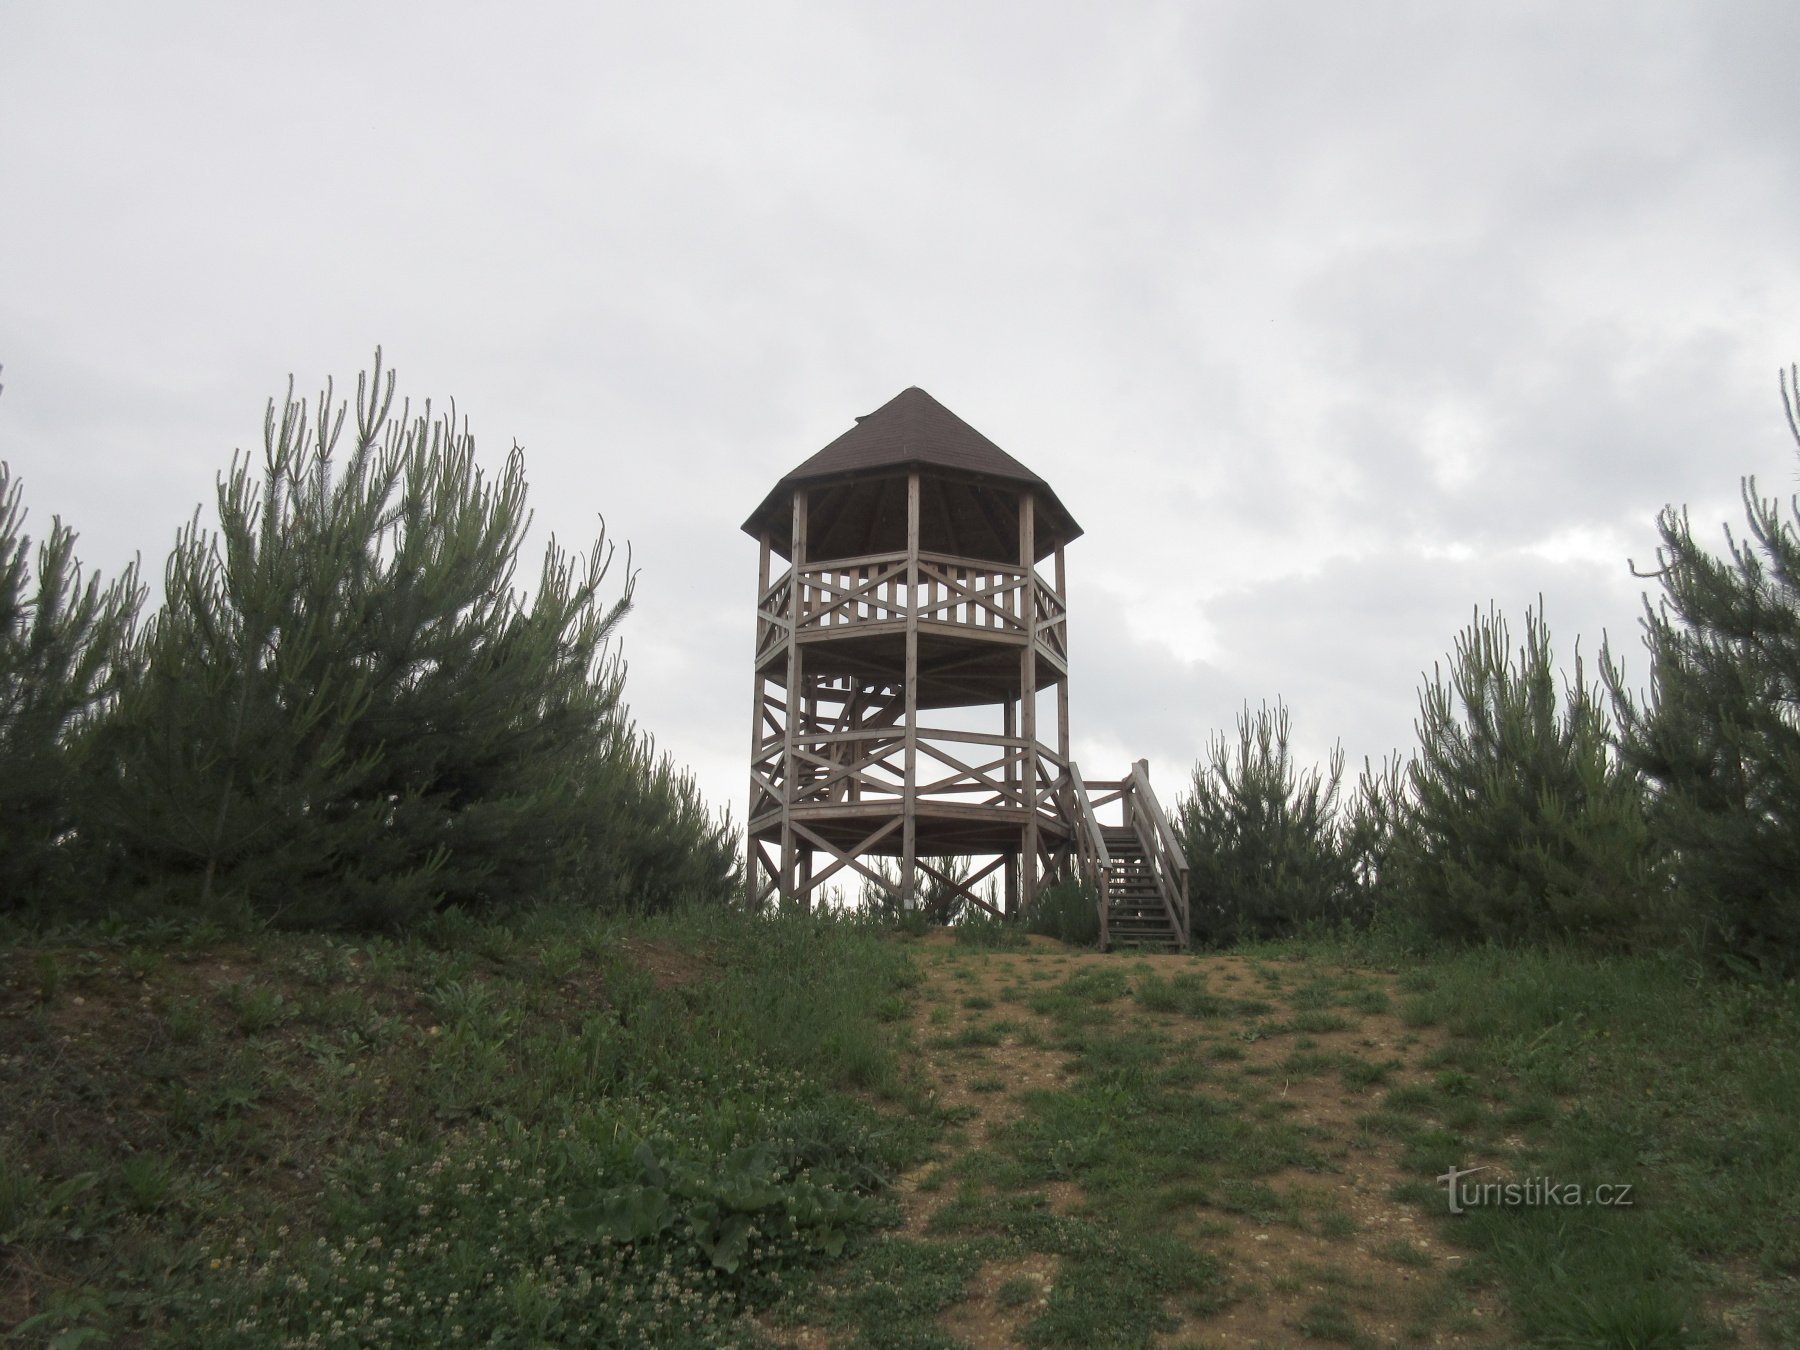 Lookout tower from the south - accessible side